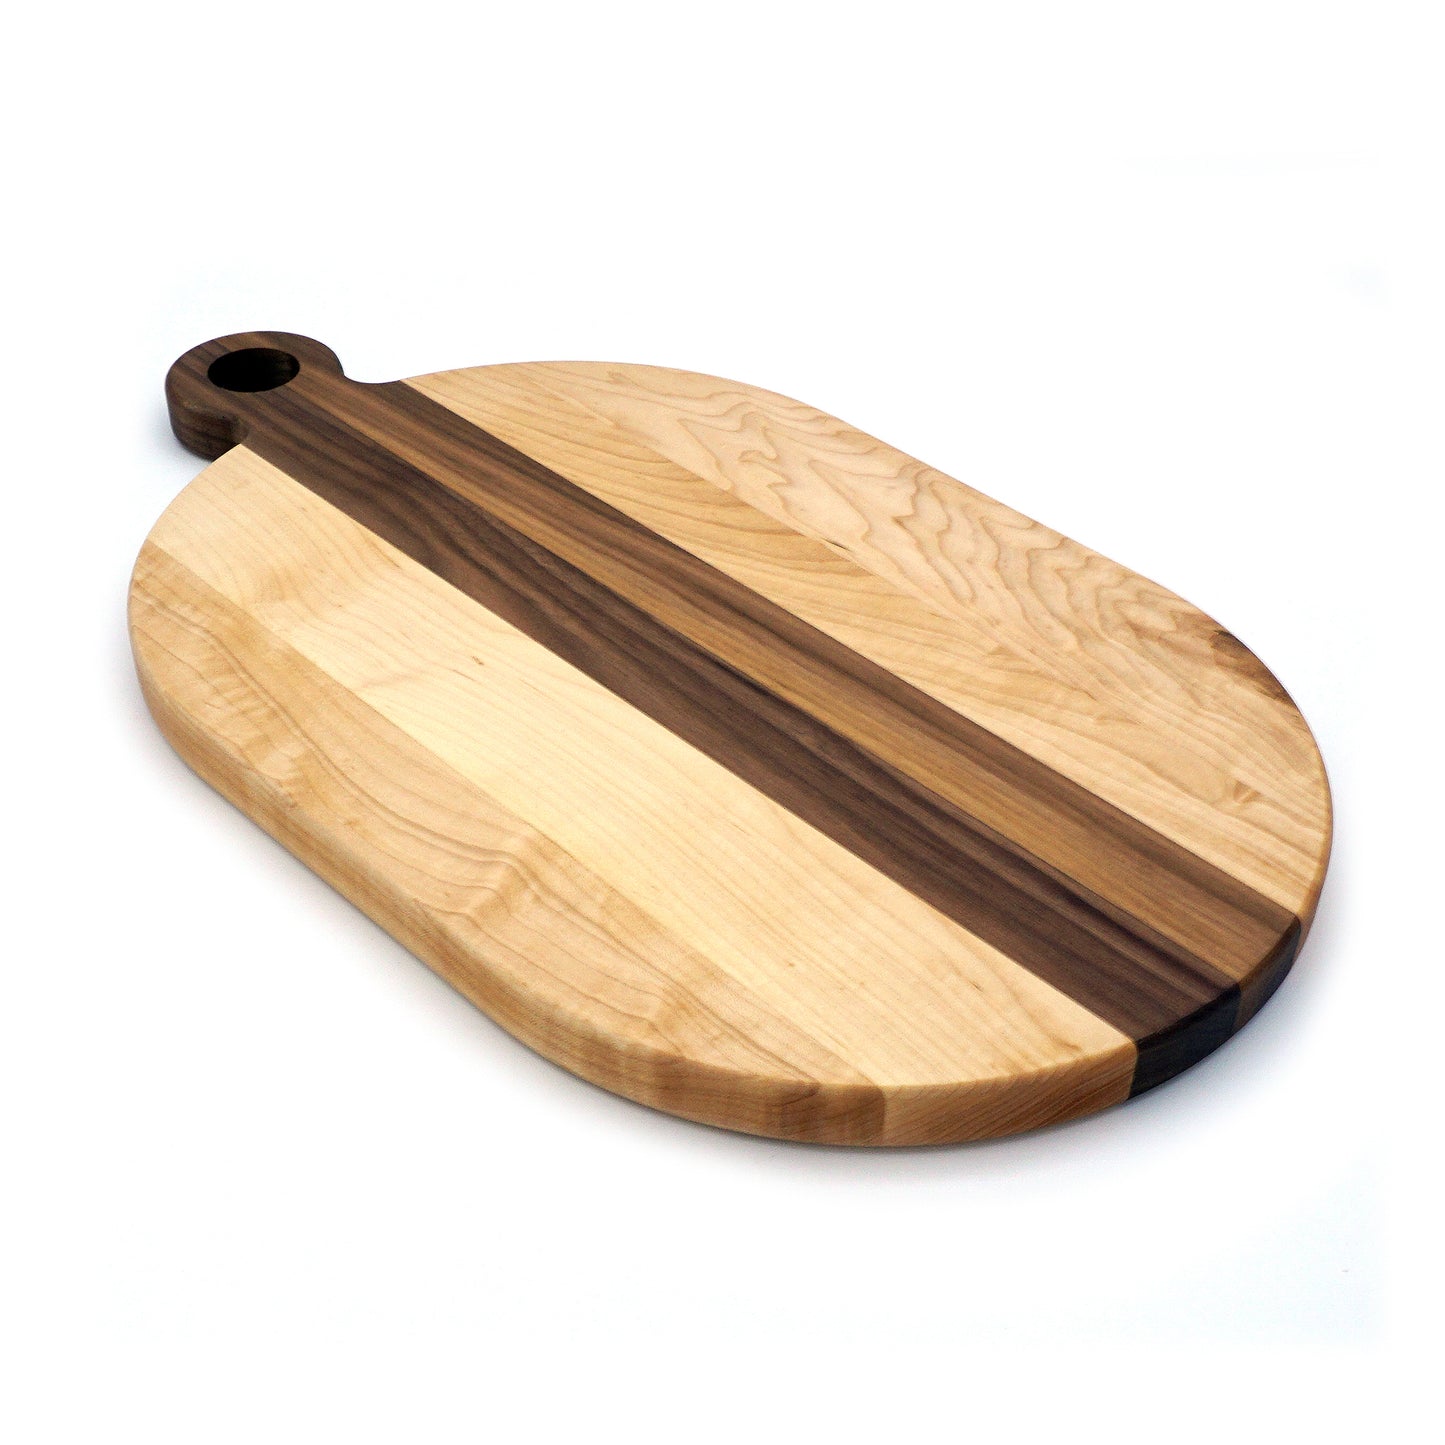 Oval Maple and Walnut Handle Serving Board-21" x 12"